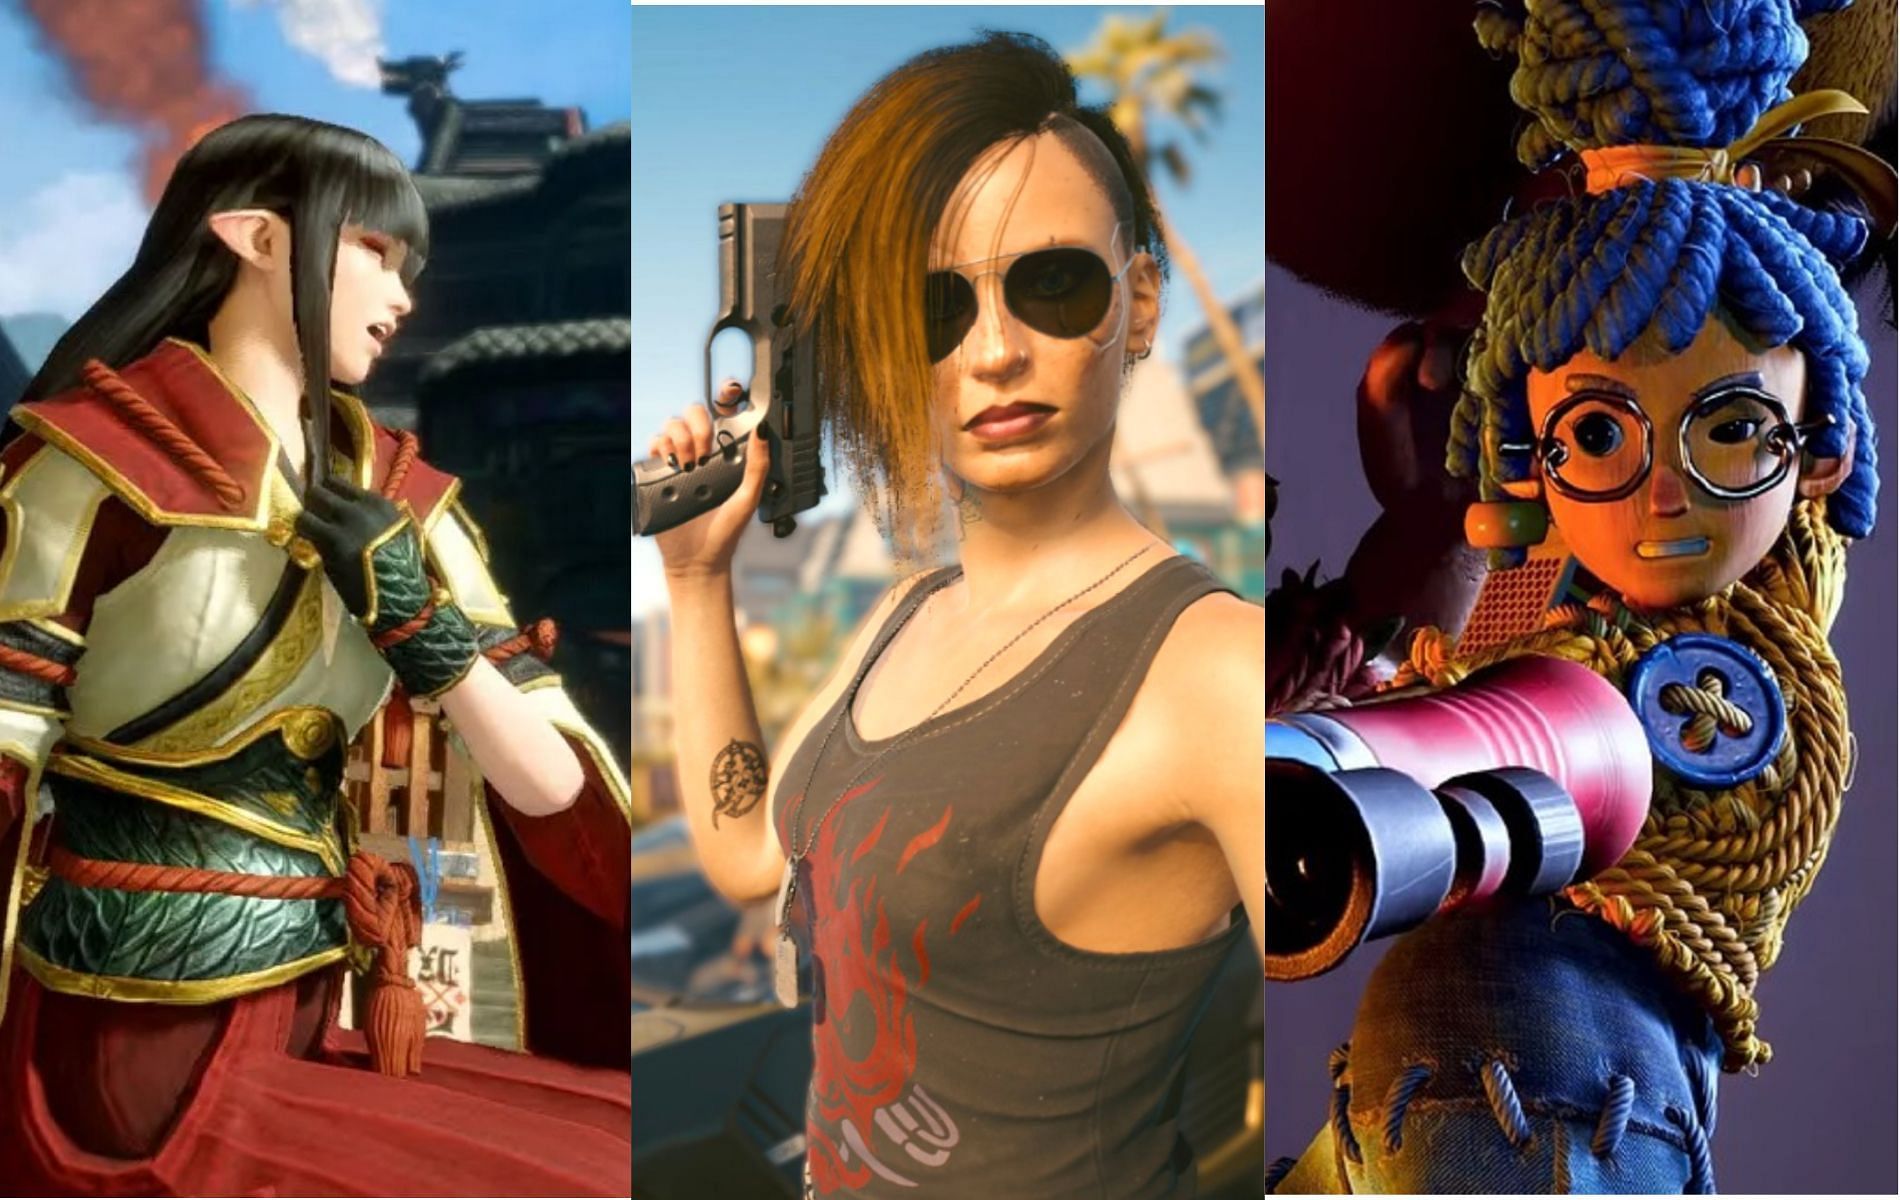 Steam Summer Sale: Games to look out for (Images via CD Projekt RED, Electronic Arts, and Capcom)